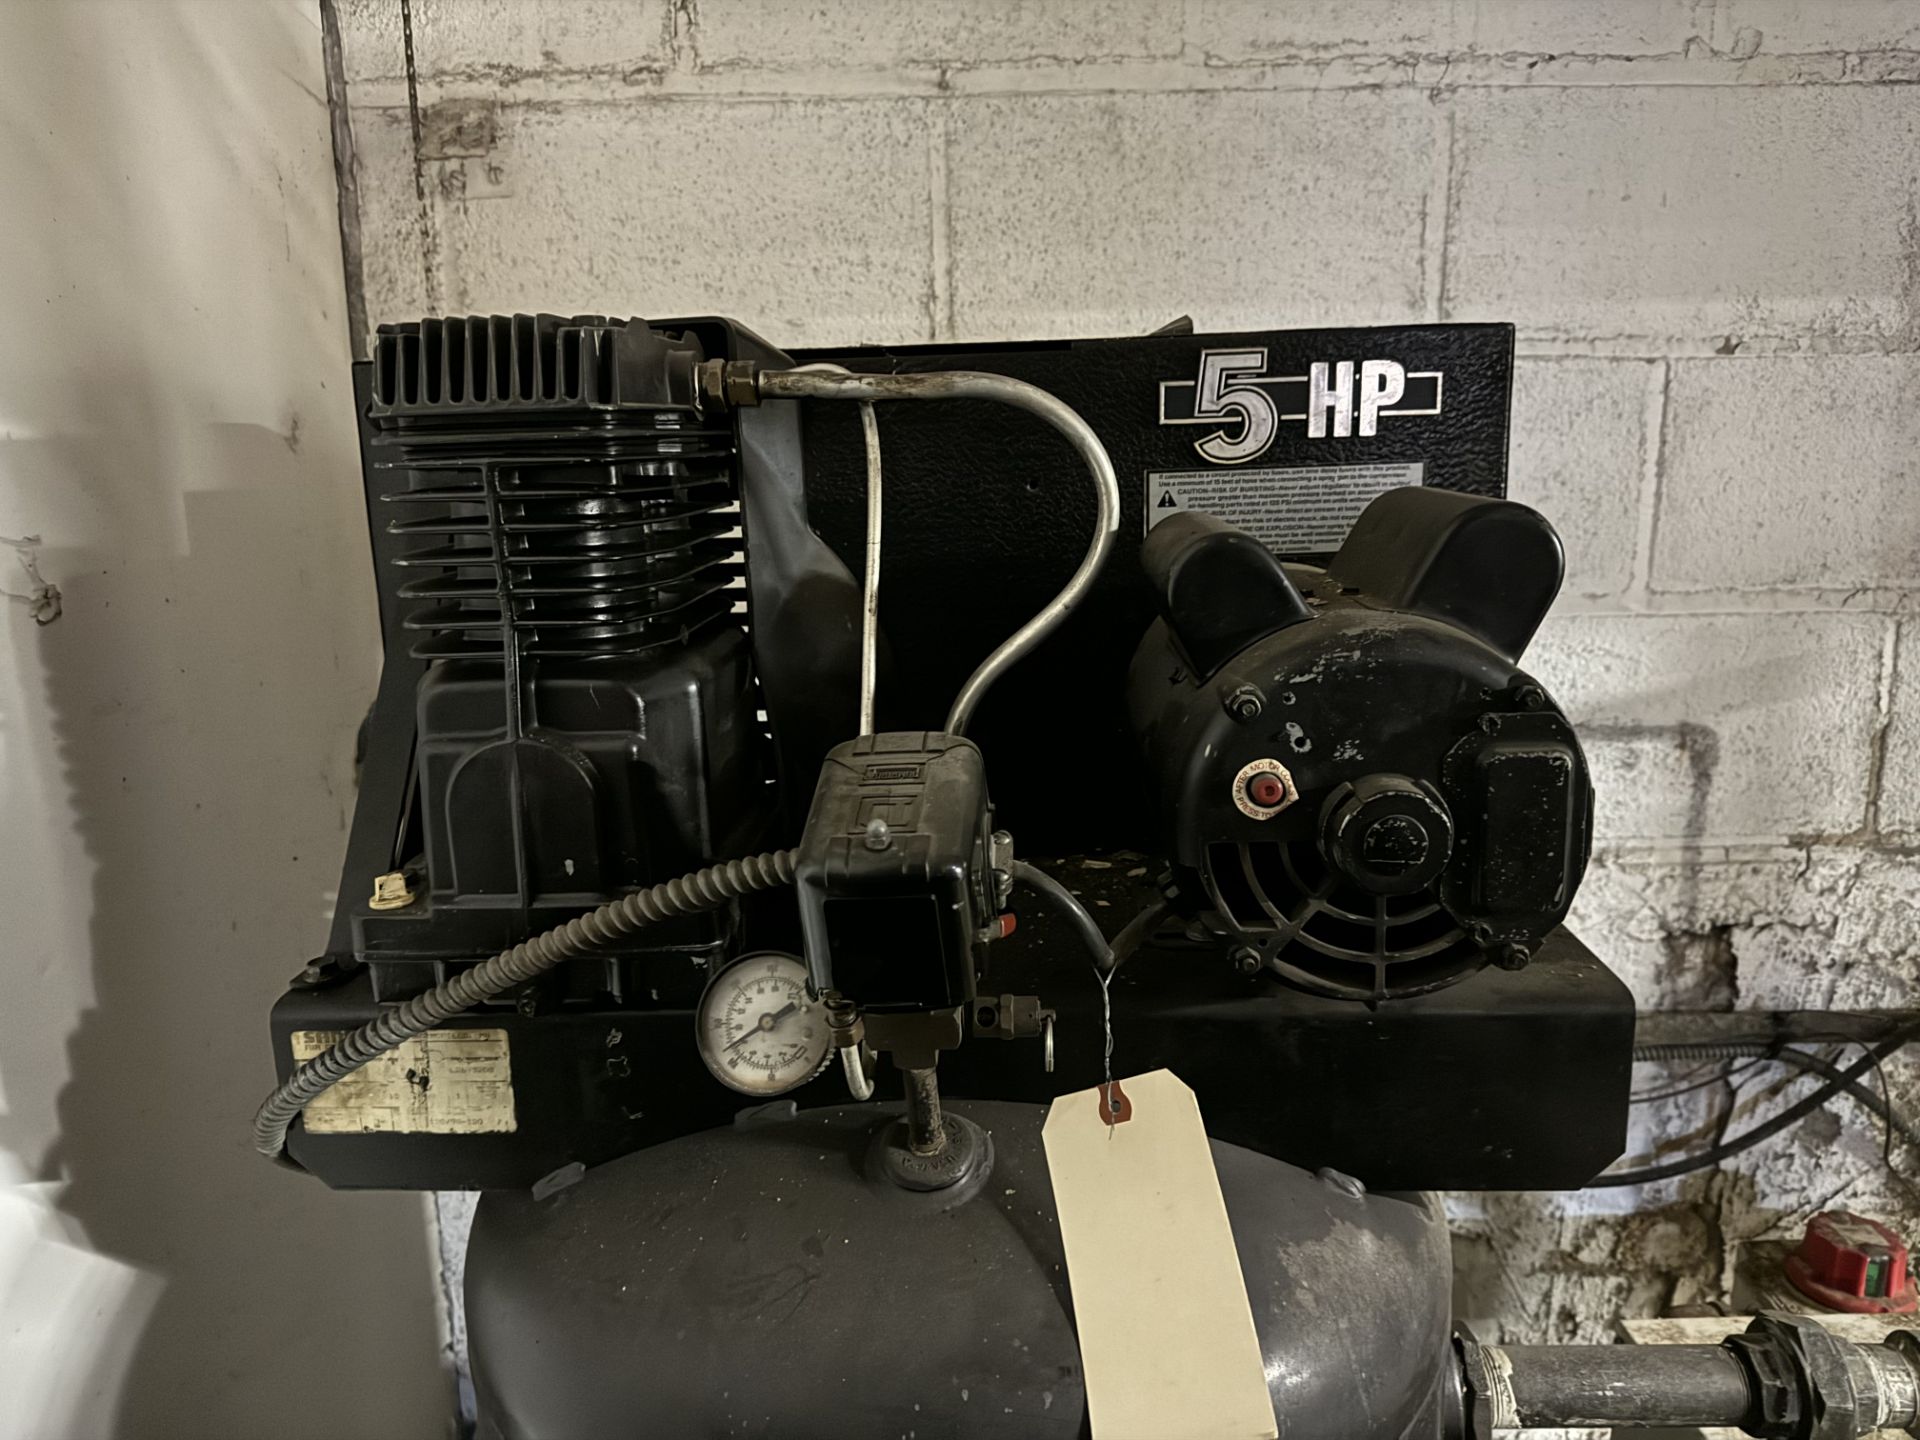 Ingersoll-Rand compressor air dryer model DRX50 with Sanborn Black Max tank - Image 6 of 12